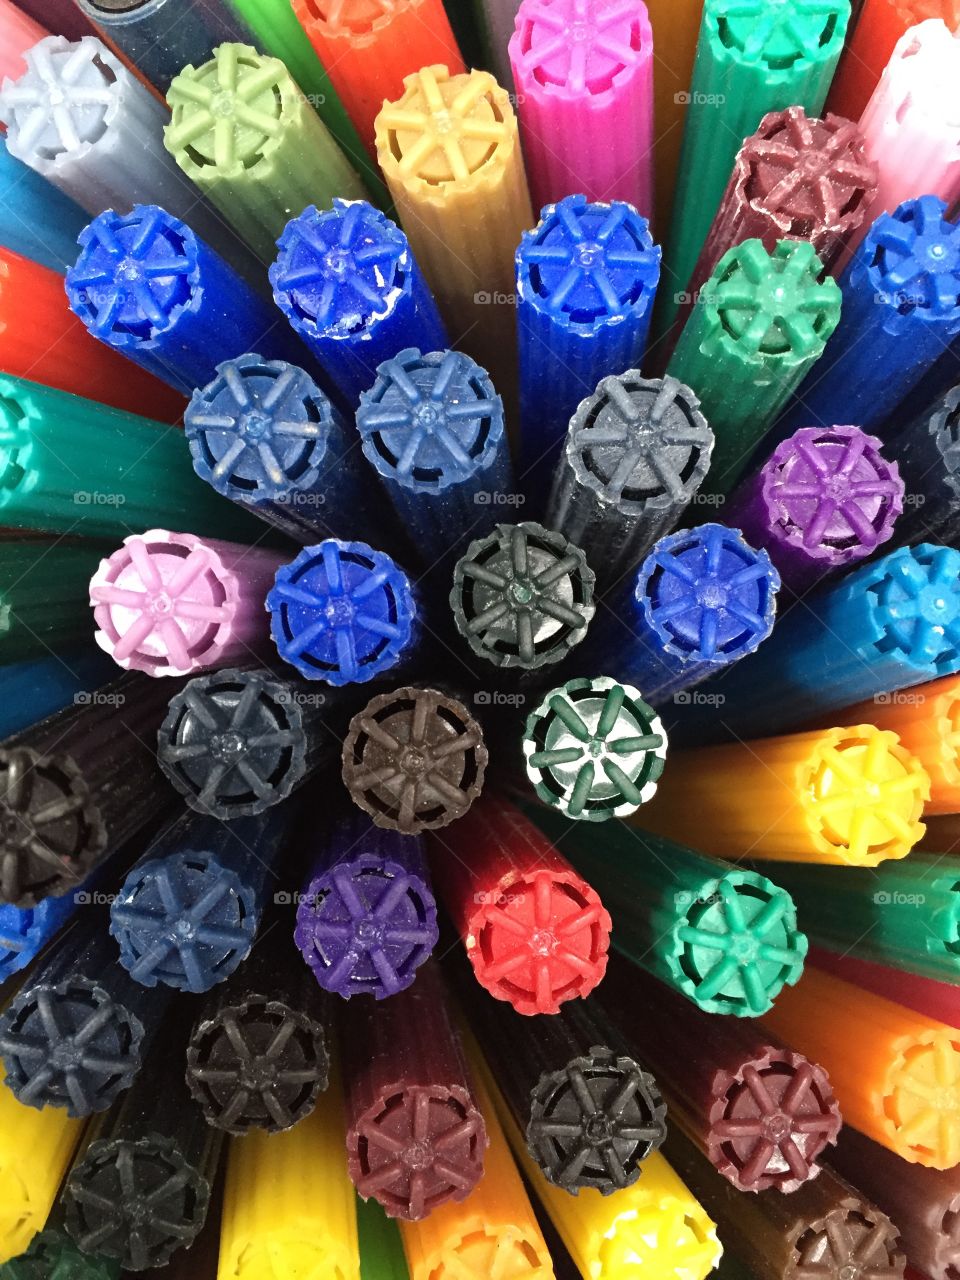 Colouring Pens. I teach workshops and see pots of pens and art supplies all around me. 

These are felt tip pens in a pot.